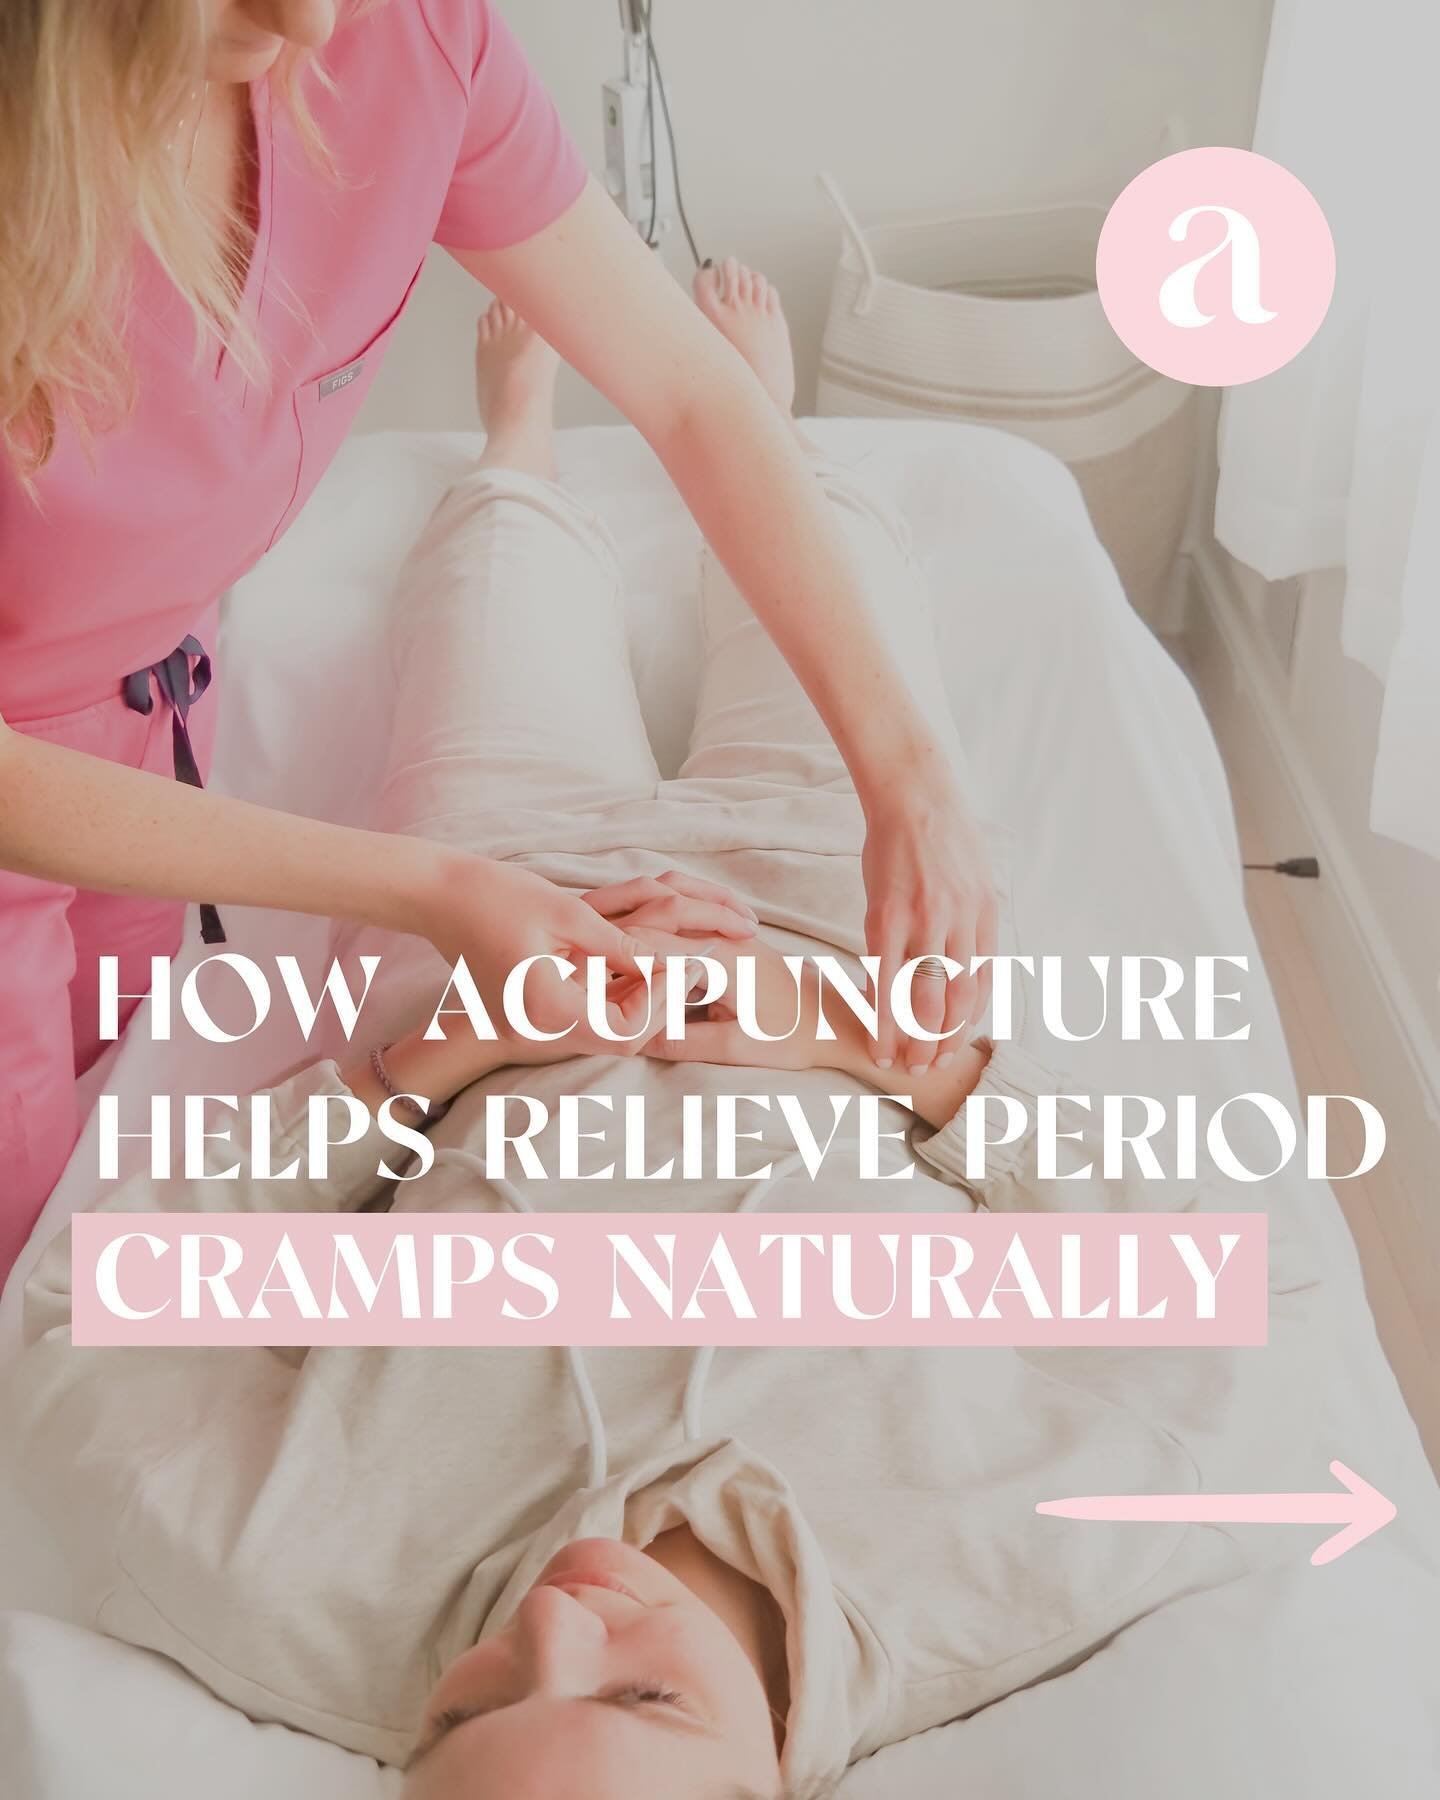 If you&rsquo;re looking for a more natural, and holistic approach to alleviating period cramps...time to give acu a try!💕👉

💓REMEMBER: Really painful periods are NOT normal!! They may be common- but they aren&rsquo;t normal. Book ur acu session th